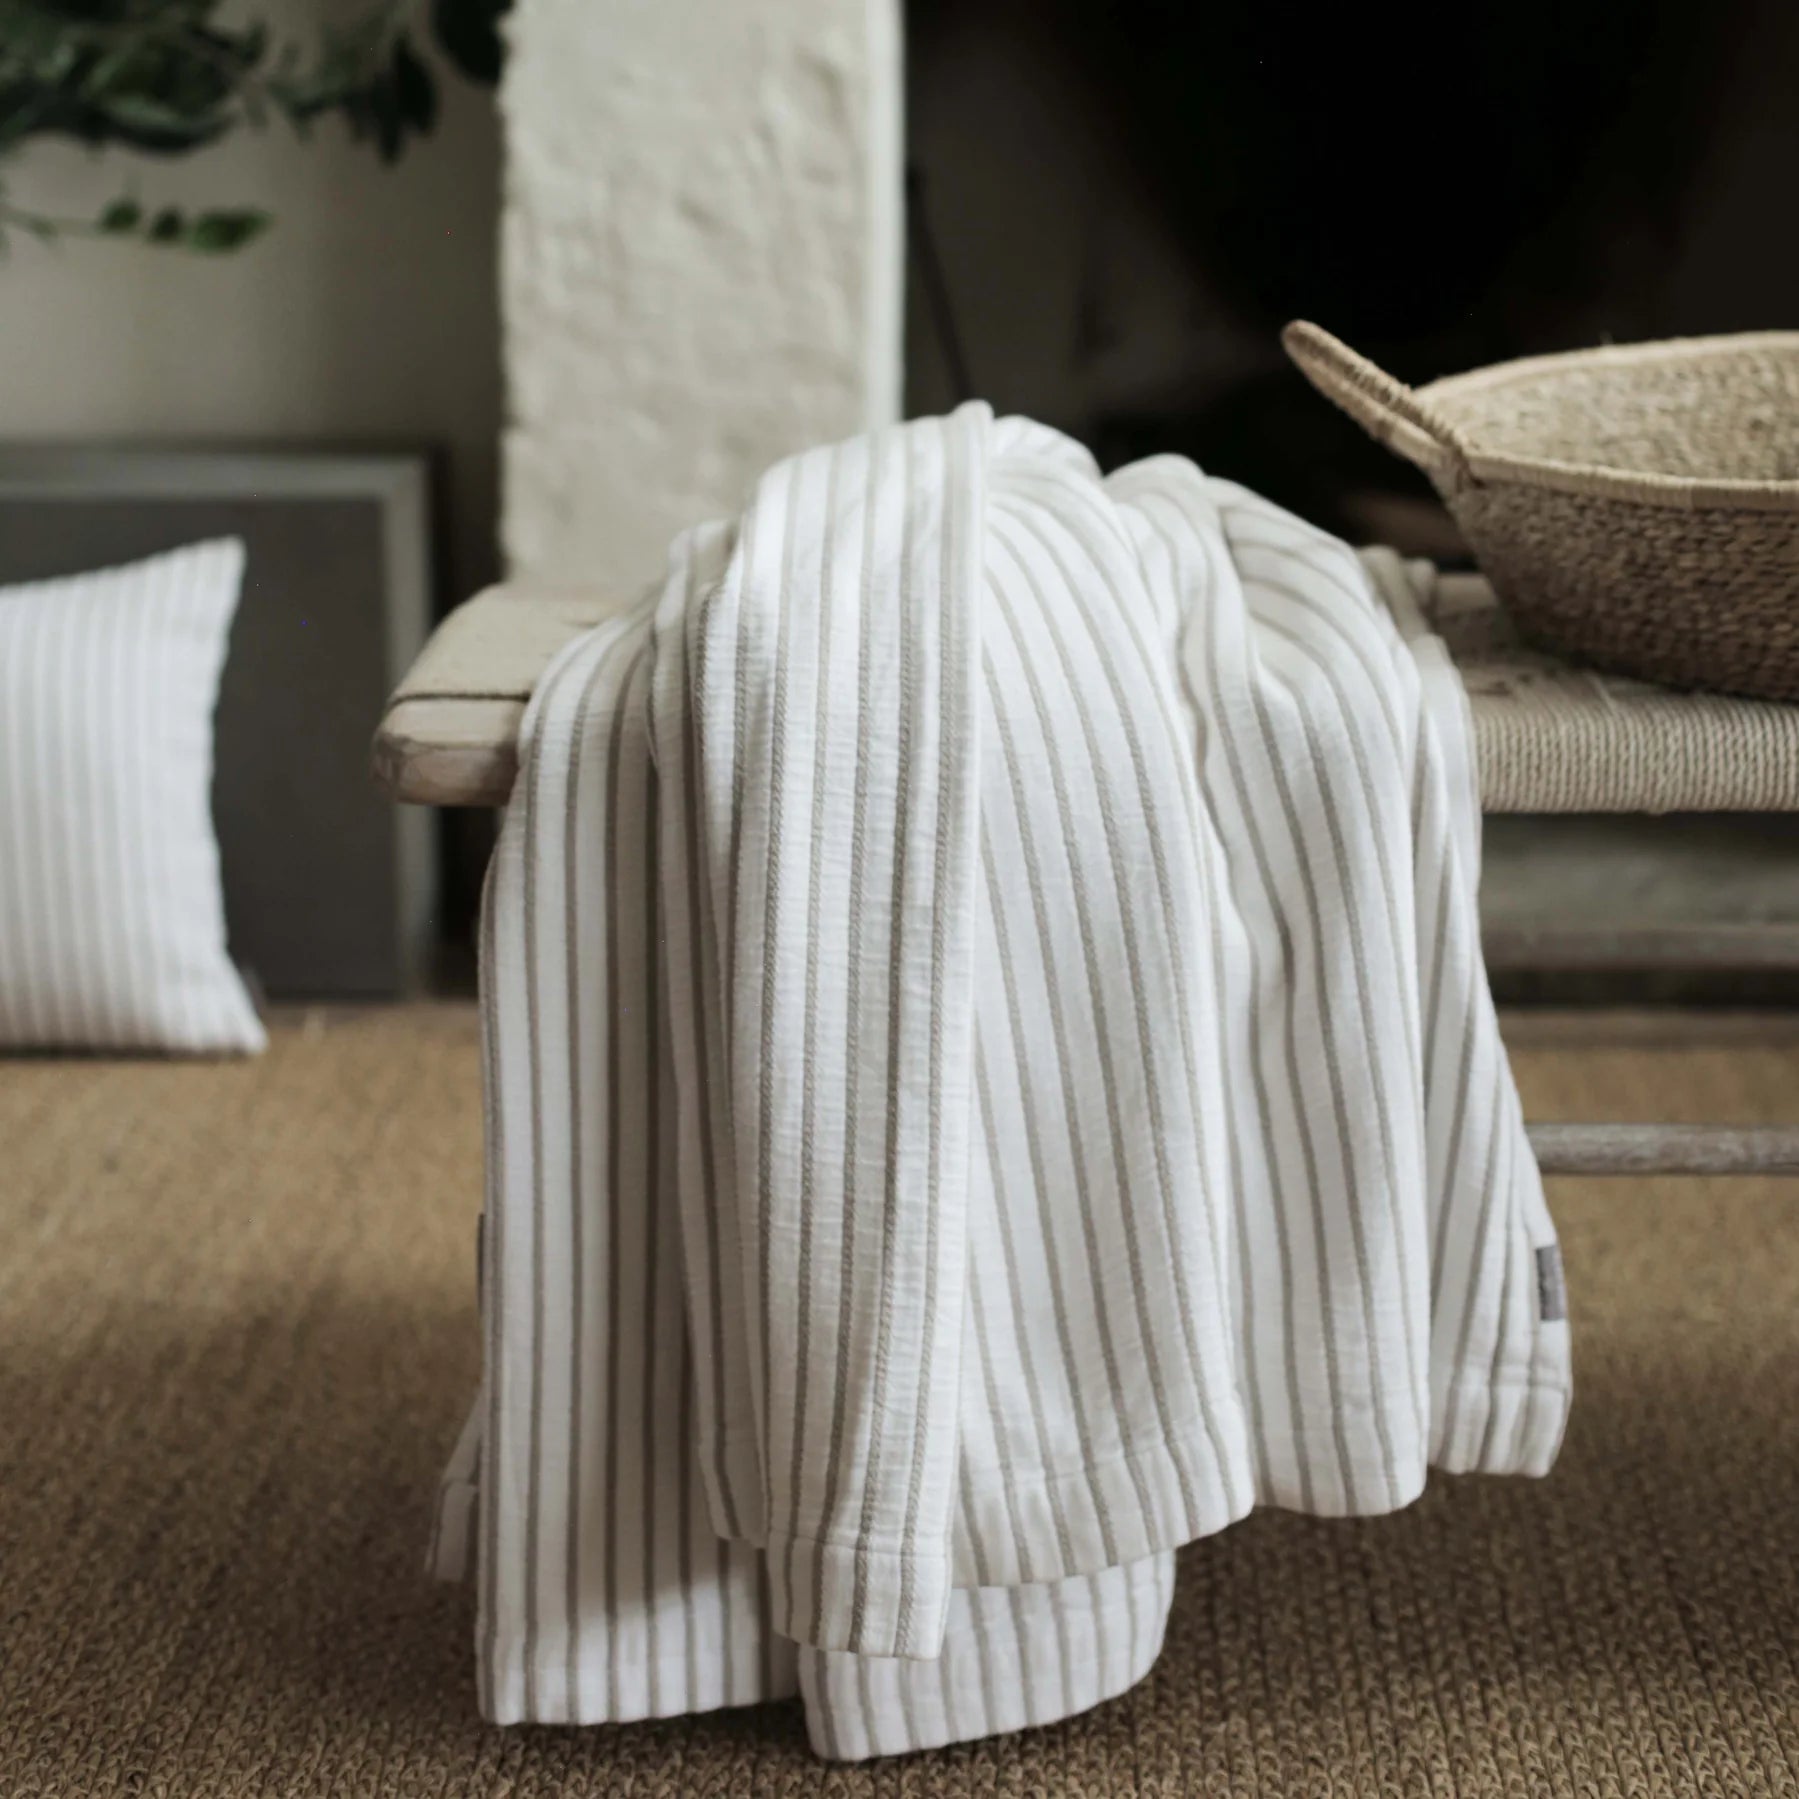 a Striped Cotton Throw Blanket draped over a woven coffee table with basket.